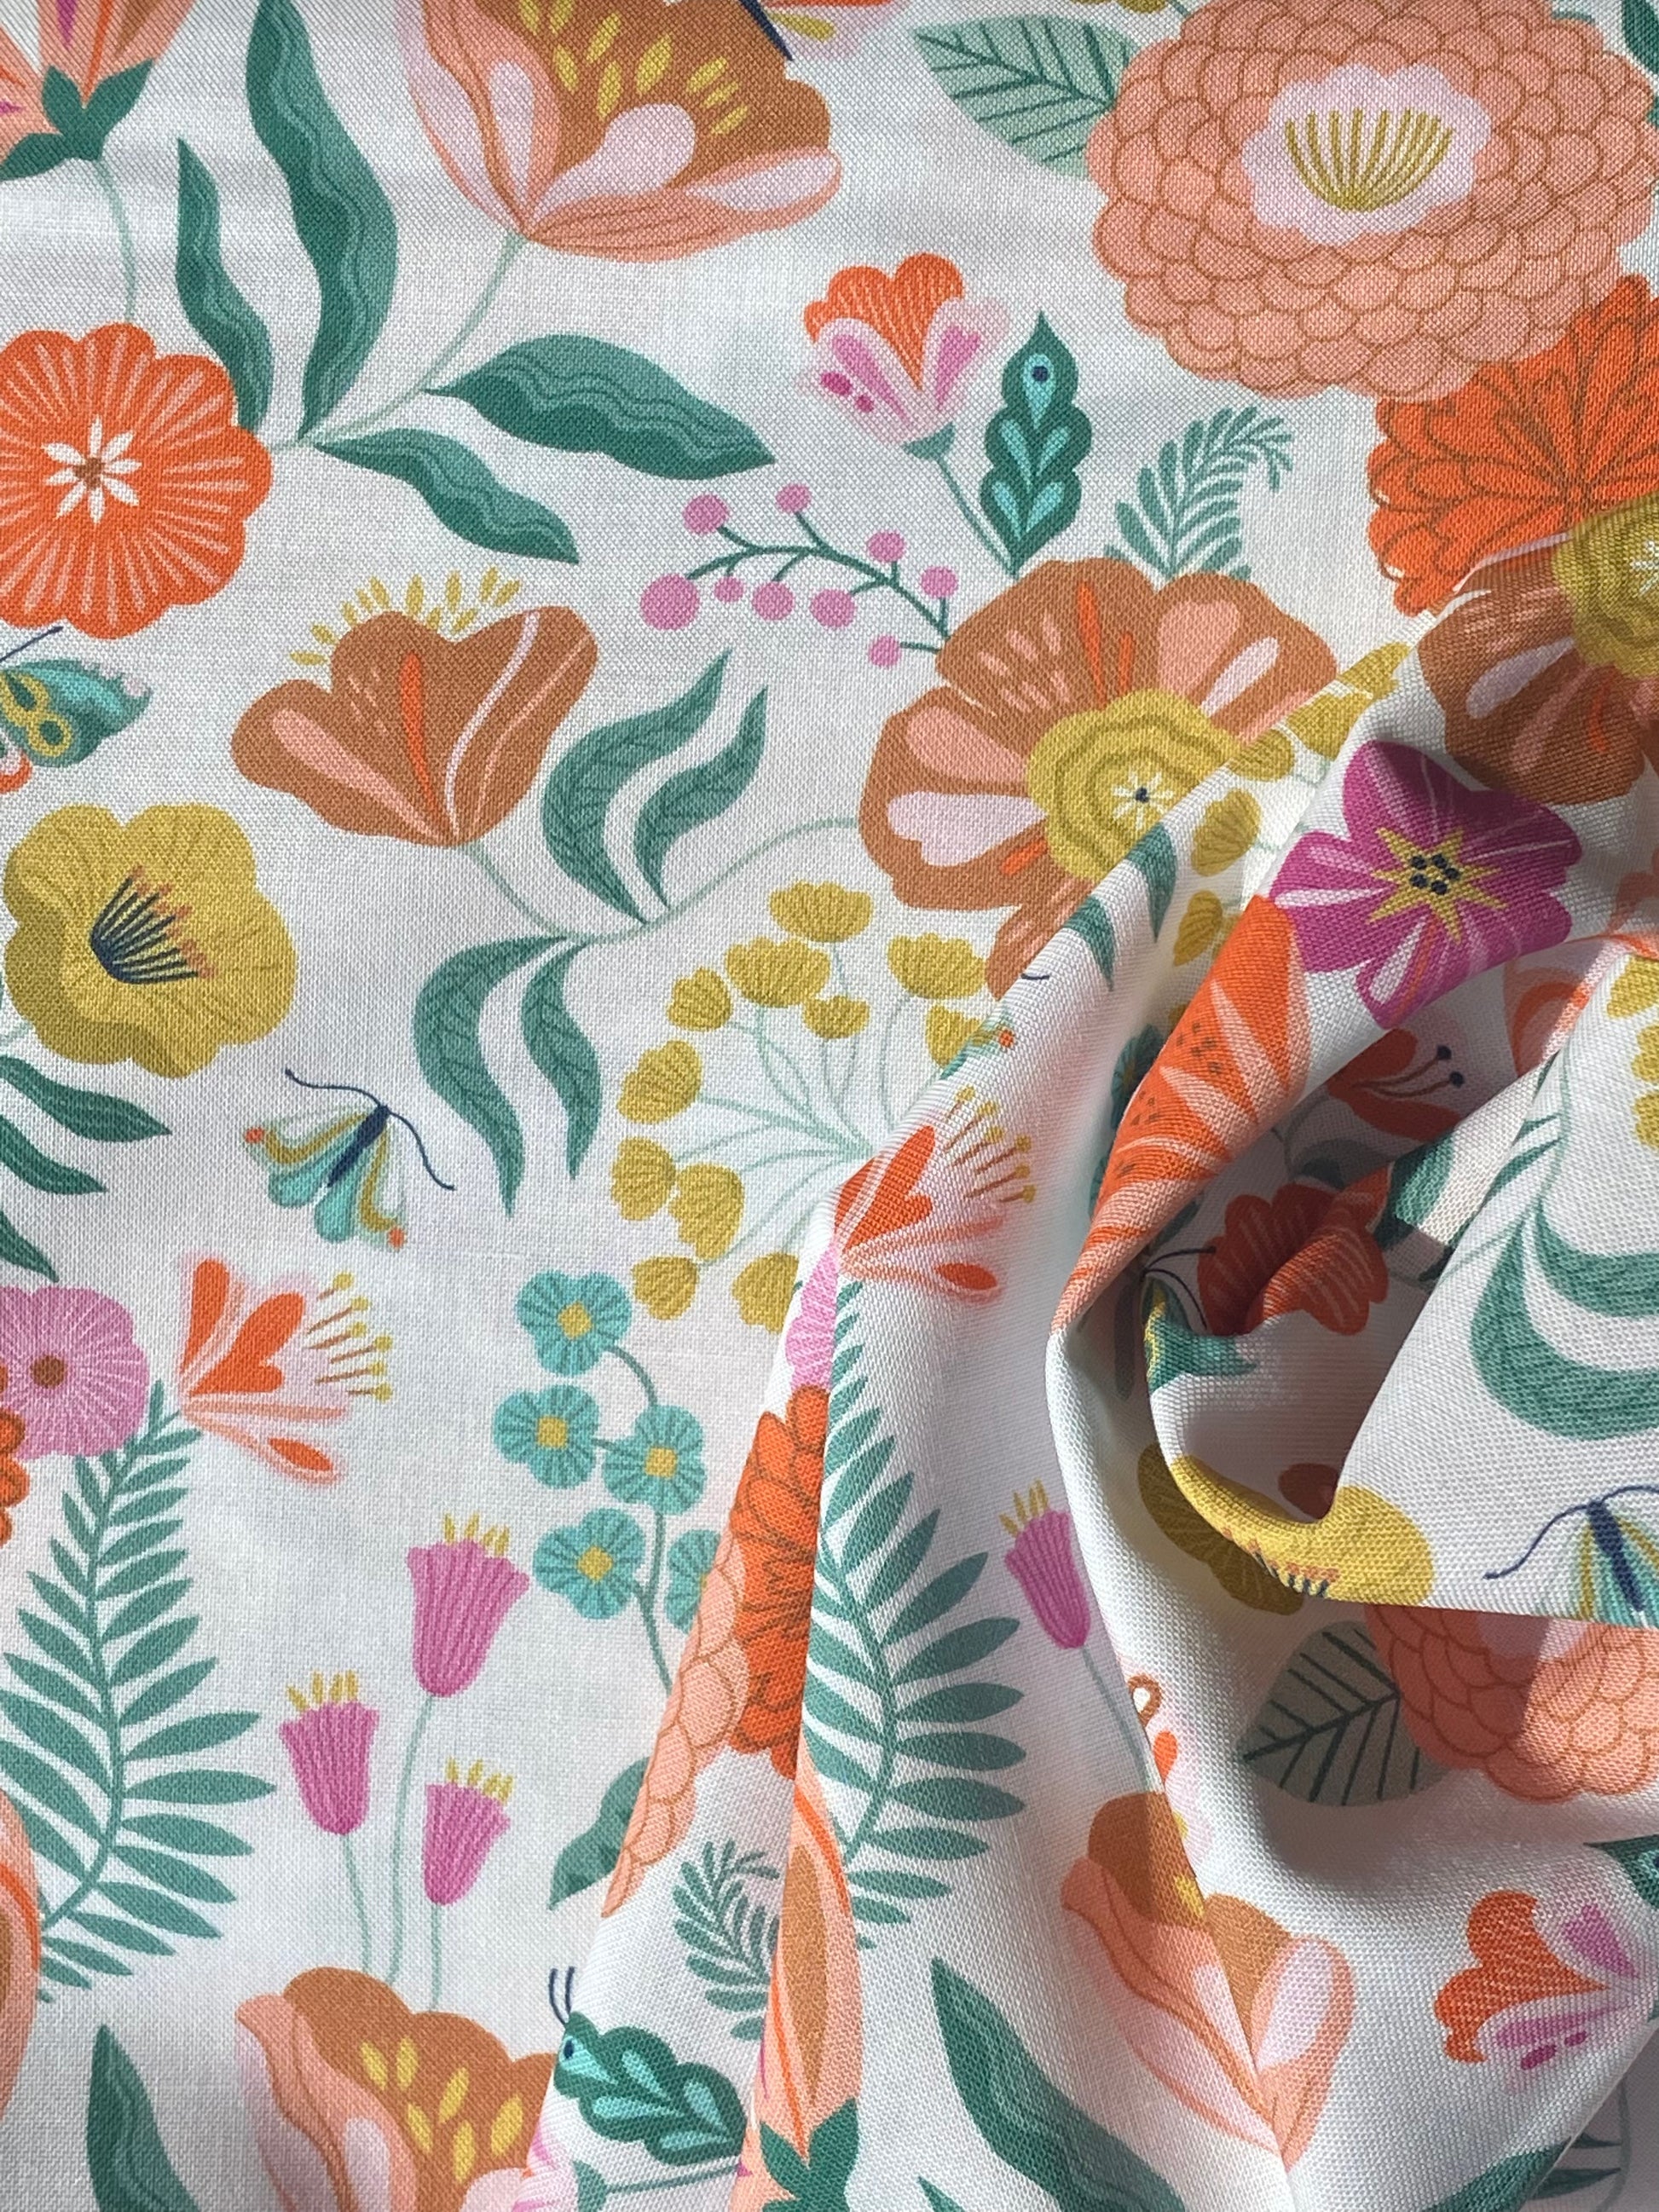 FLUT2075 Colourful flowers on a white cotton fabric designed by Bethan Janine for Dashwood Studios.  It is ideal for patchwork, quilting, patchwork, dressmaking and other crafts. Free delivery over £30.